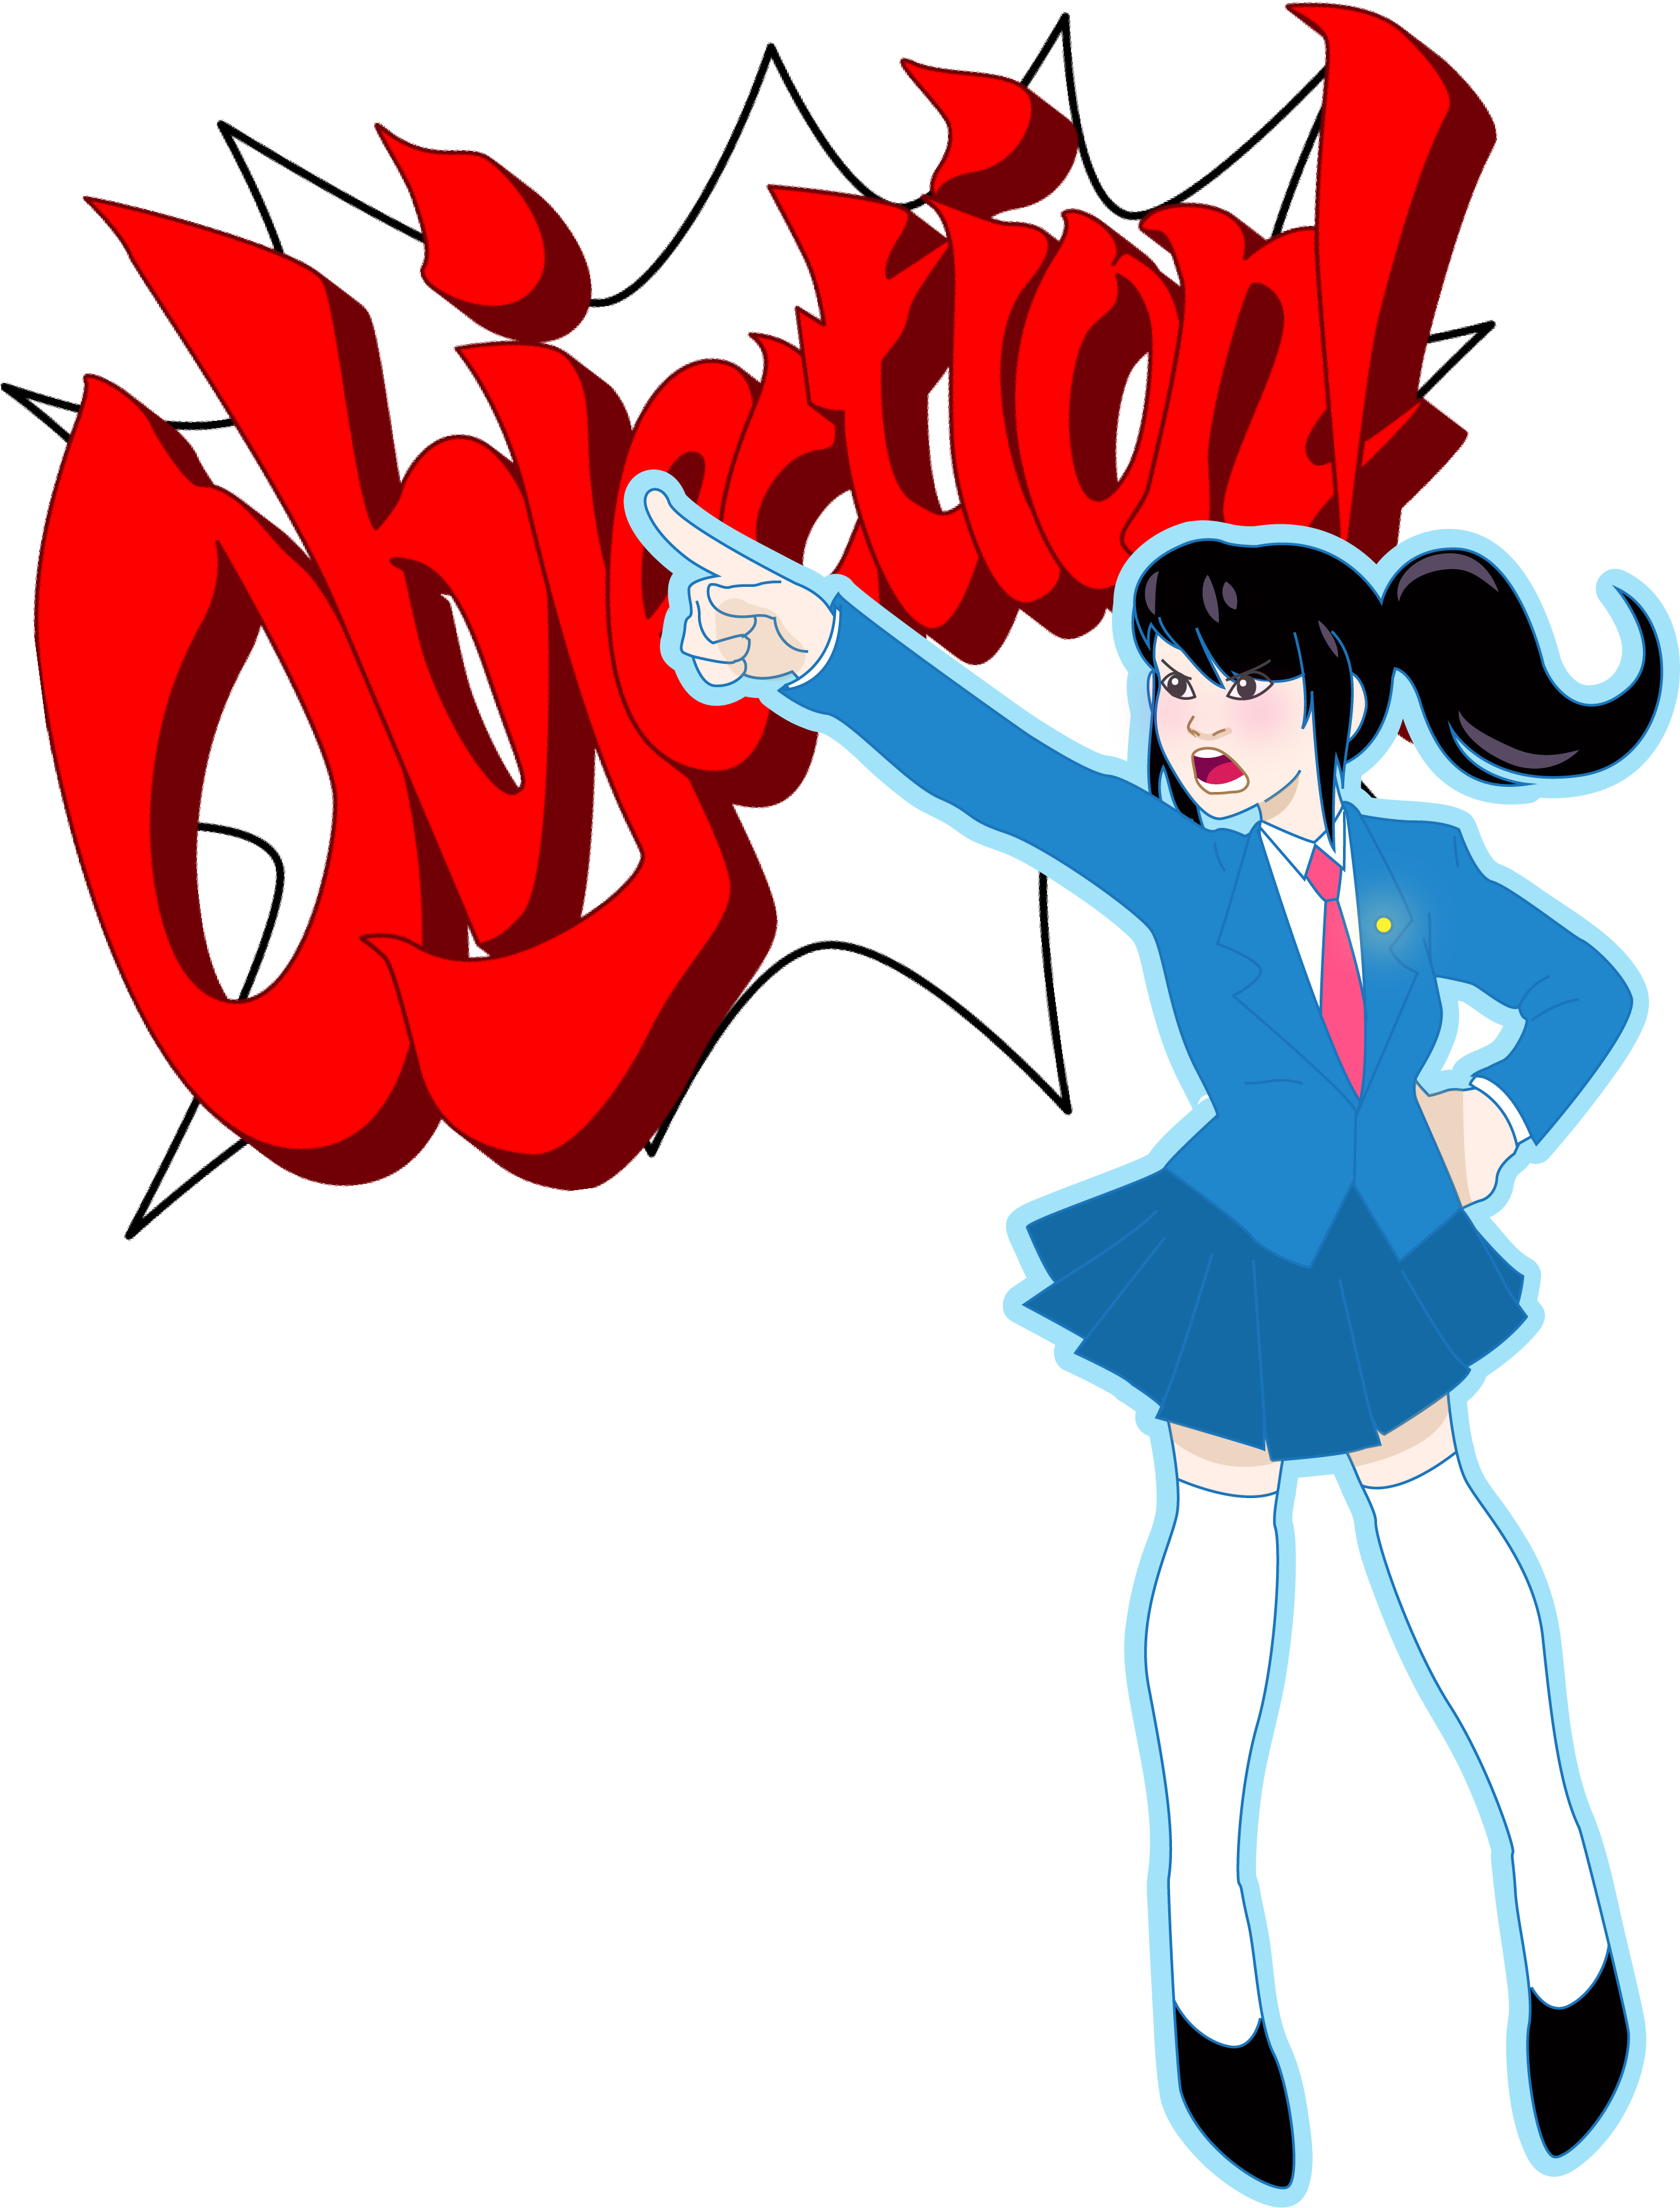 I Absolutely Love Ace Attorney, So Seeing Yandere Chan - Apollo Justice: Ace Attorney (3313x3688)